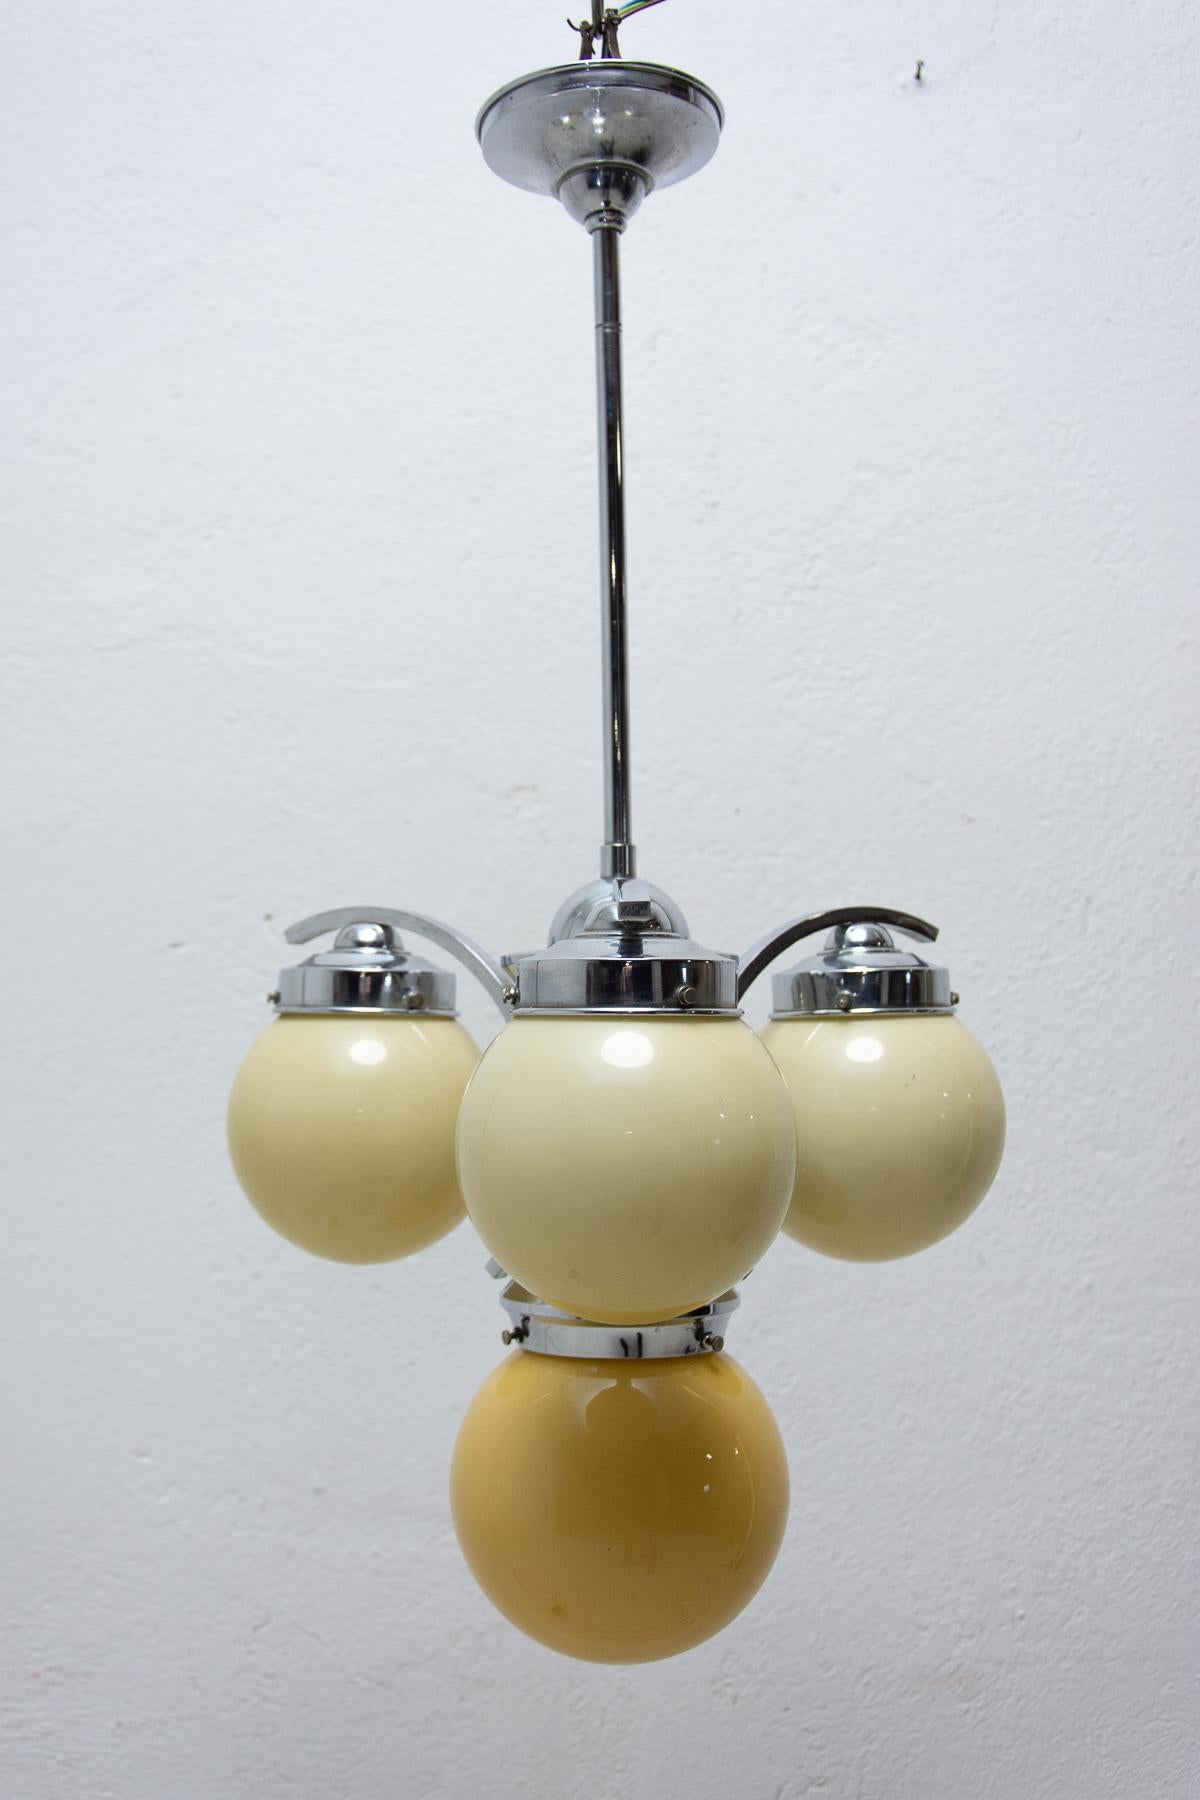 Art Deco three-armed chrome chandelier with three curved arms, shades in yellowish glass, made in the 1930´s. One ball has a slightly different shade of the yellow colour. New wiring.

Measures: Height: 70 cm

Diameter: 36 cm

Lamp shade: 32